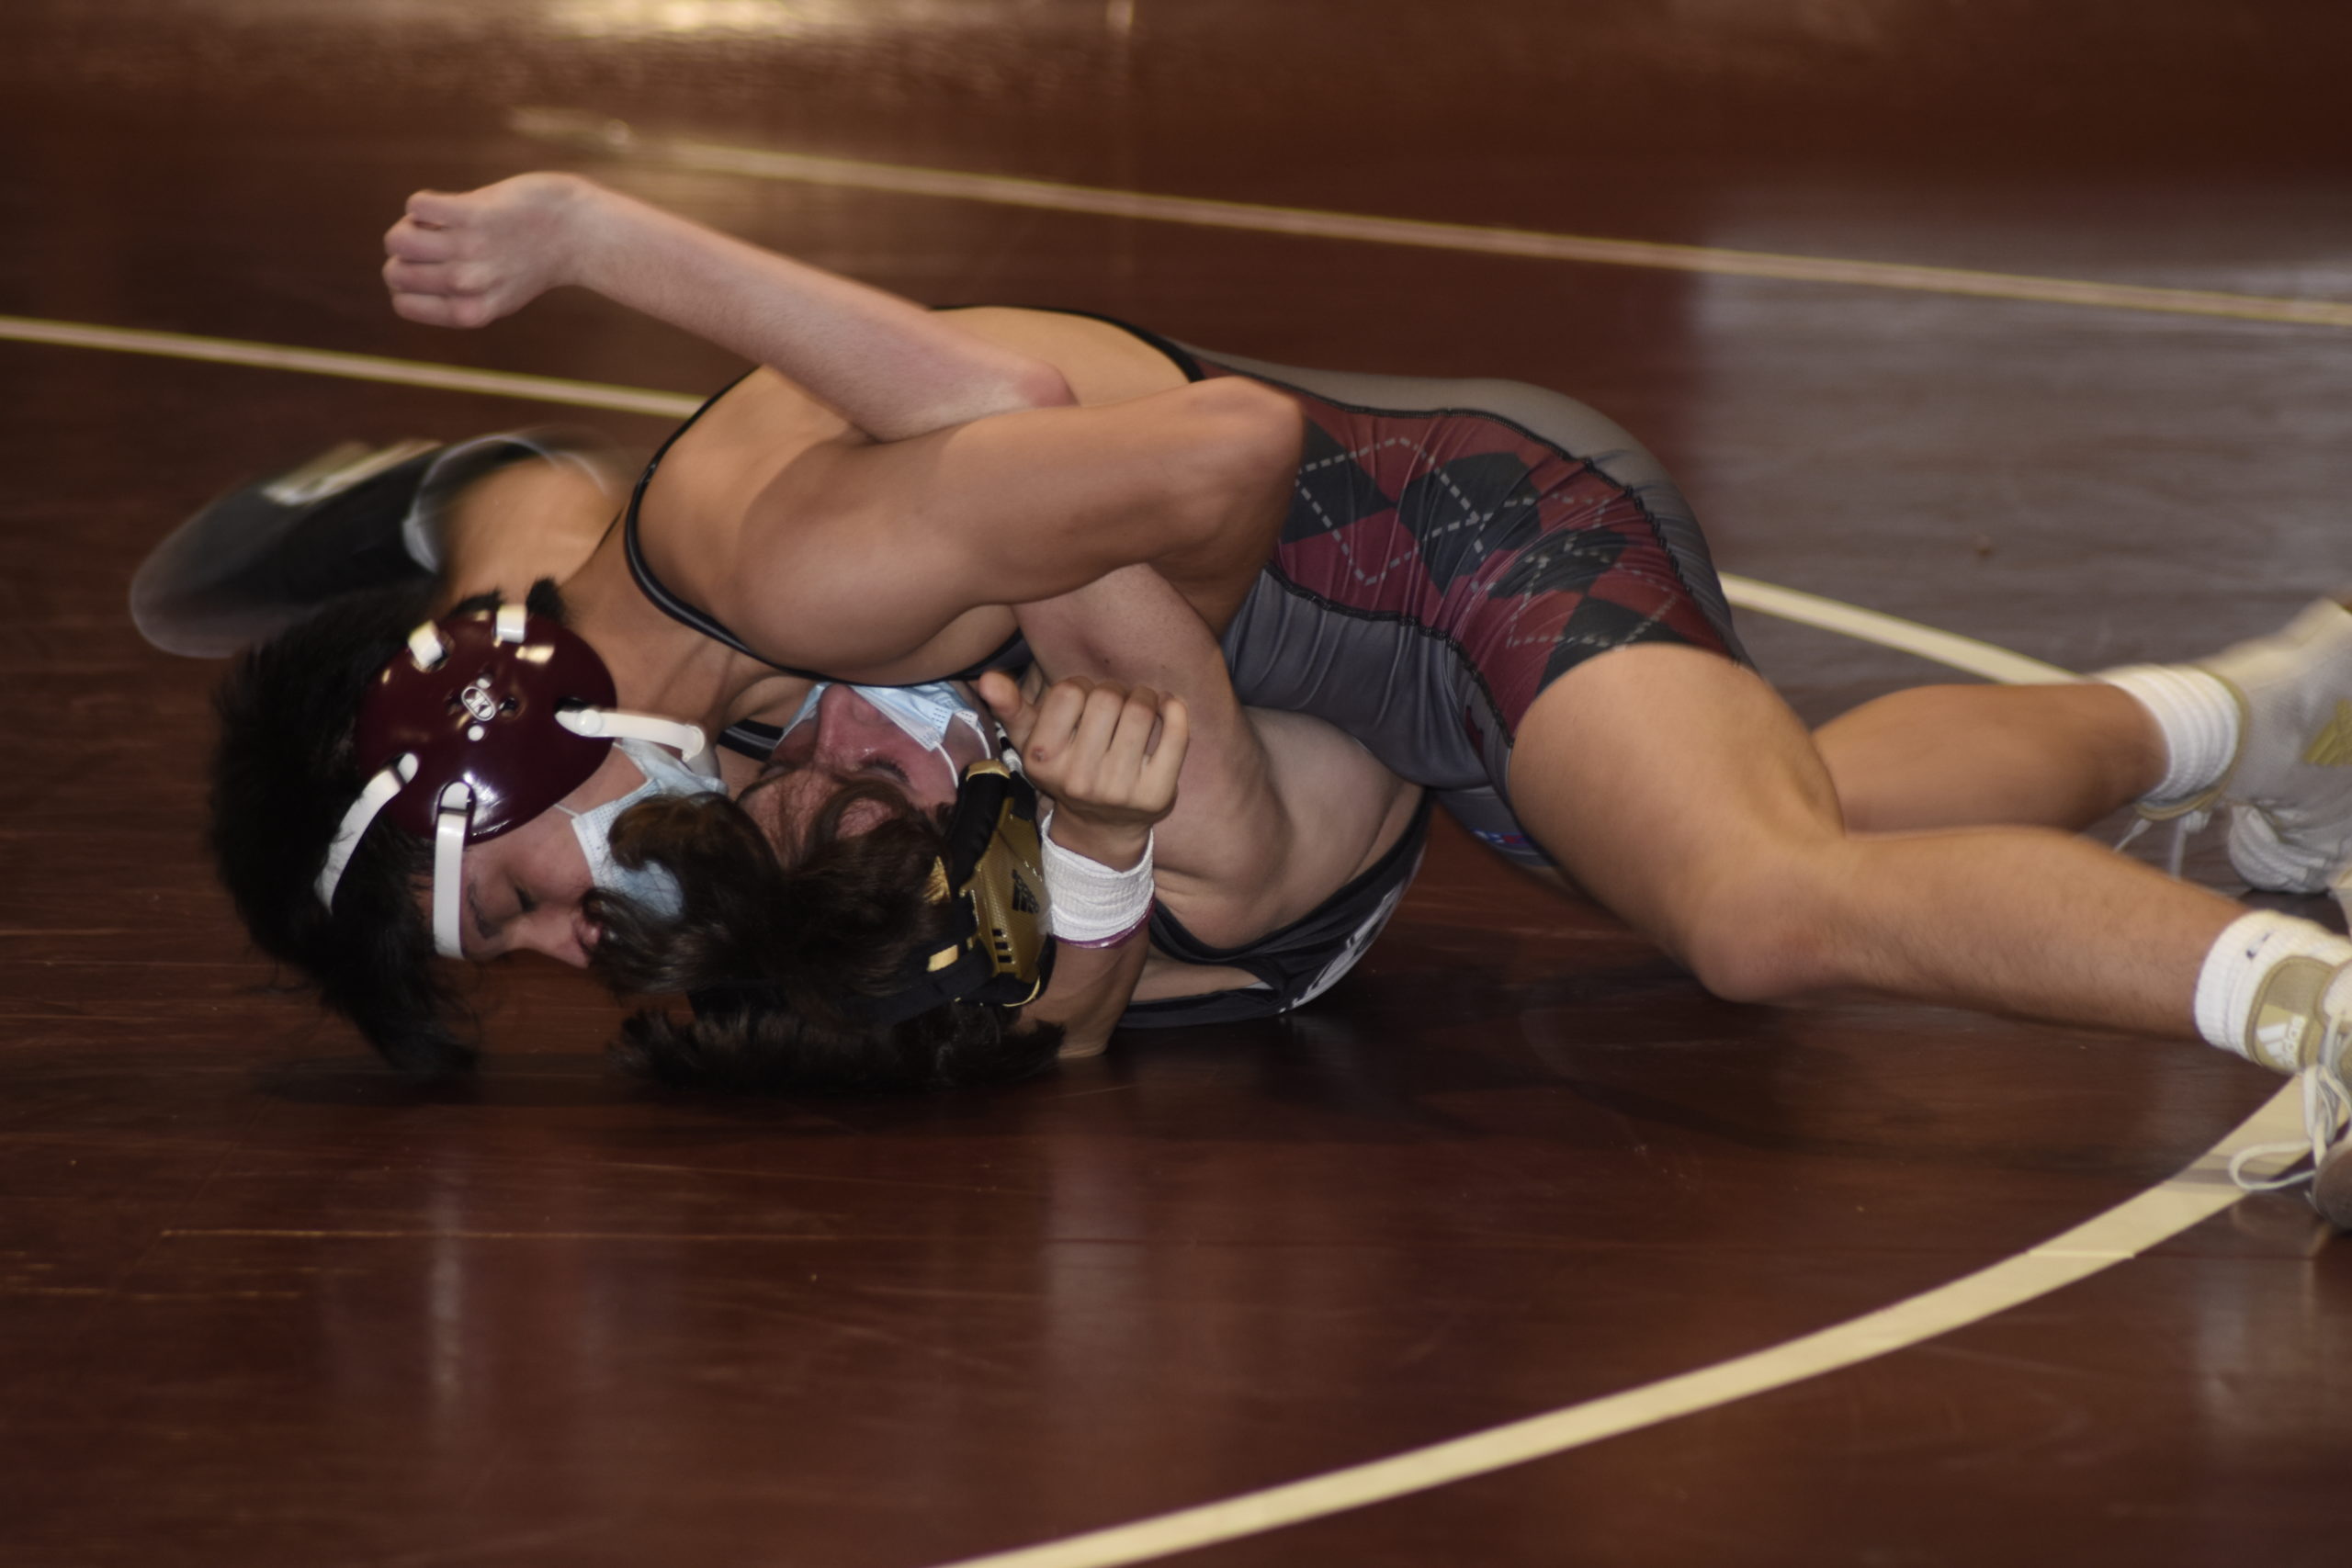 East Hampton's Juan Roque scores points on Babylon's Paul Forthmuller. Roque won by technical fall in the third period.